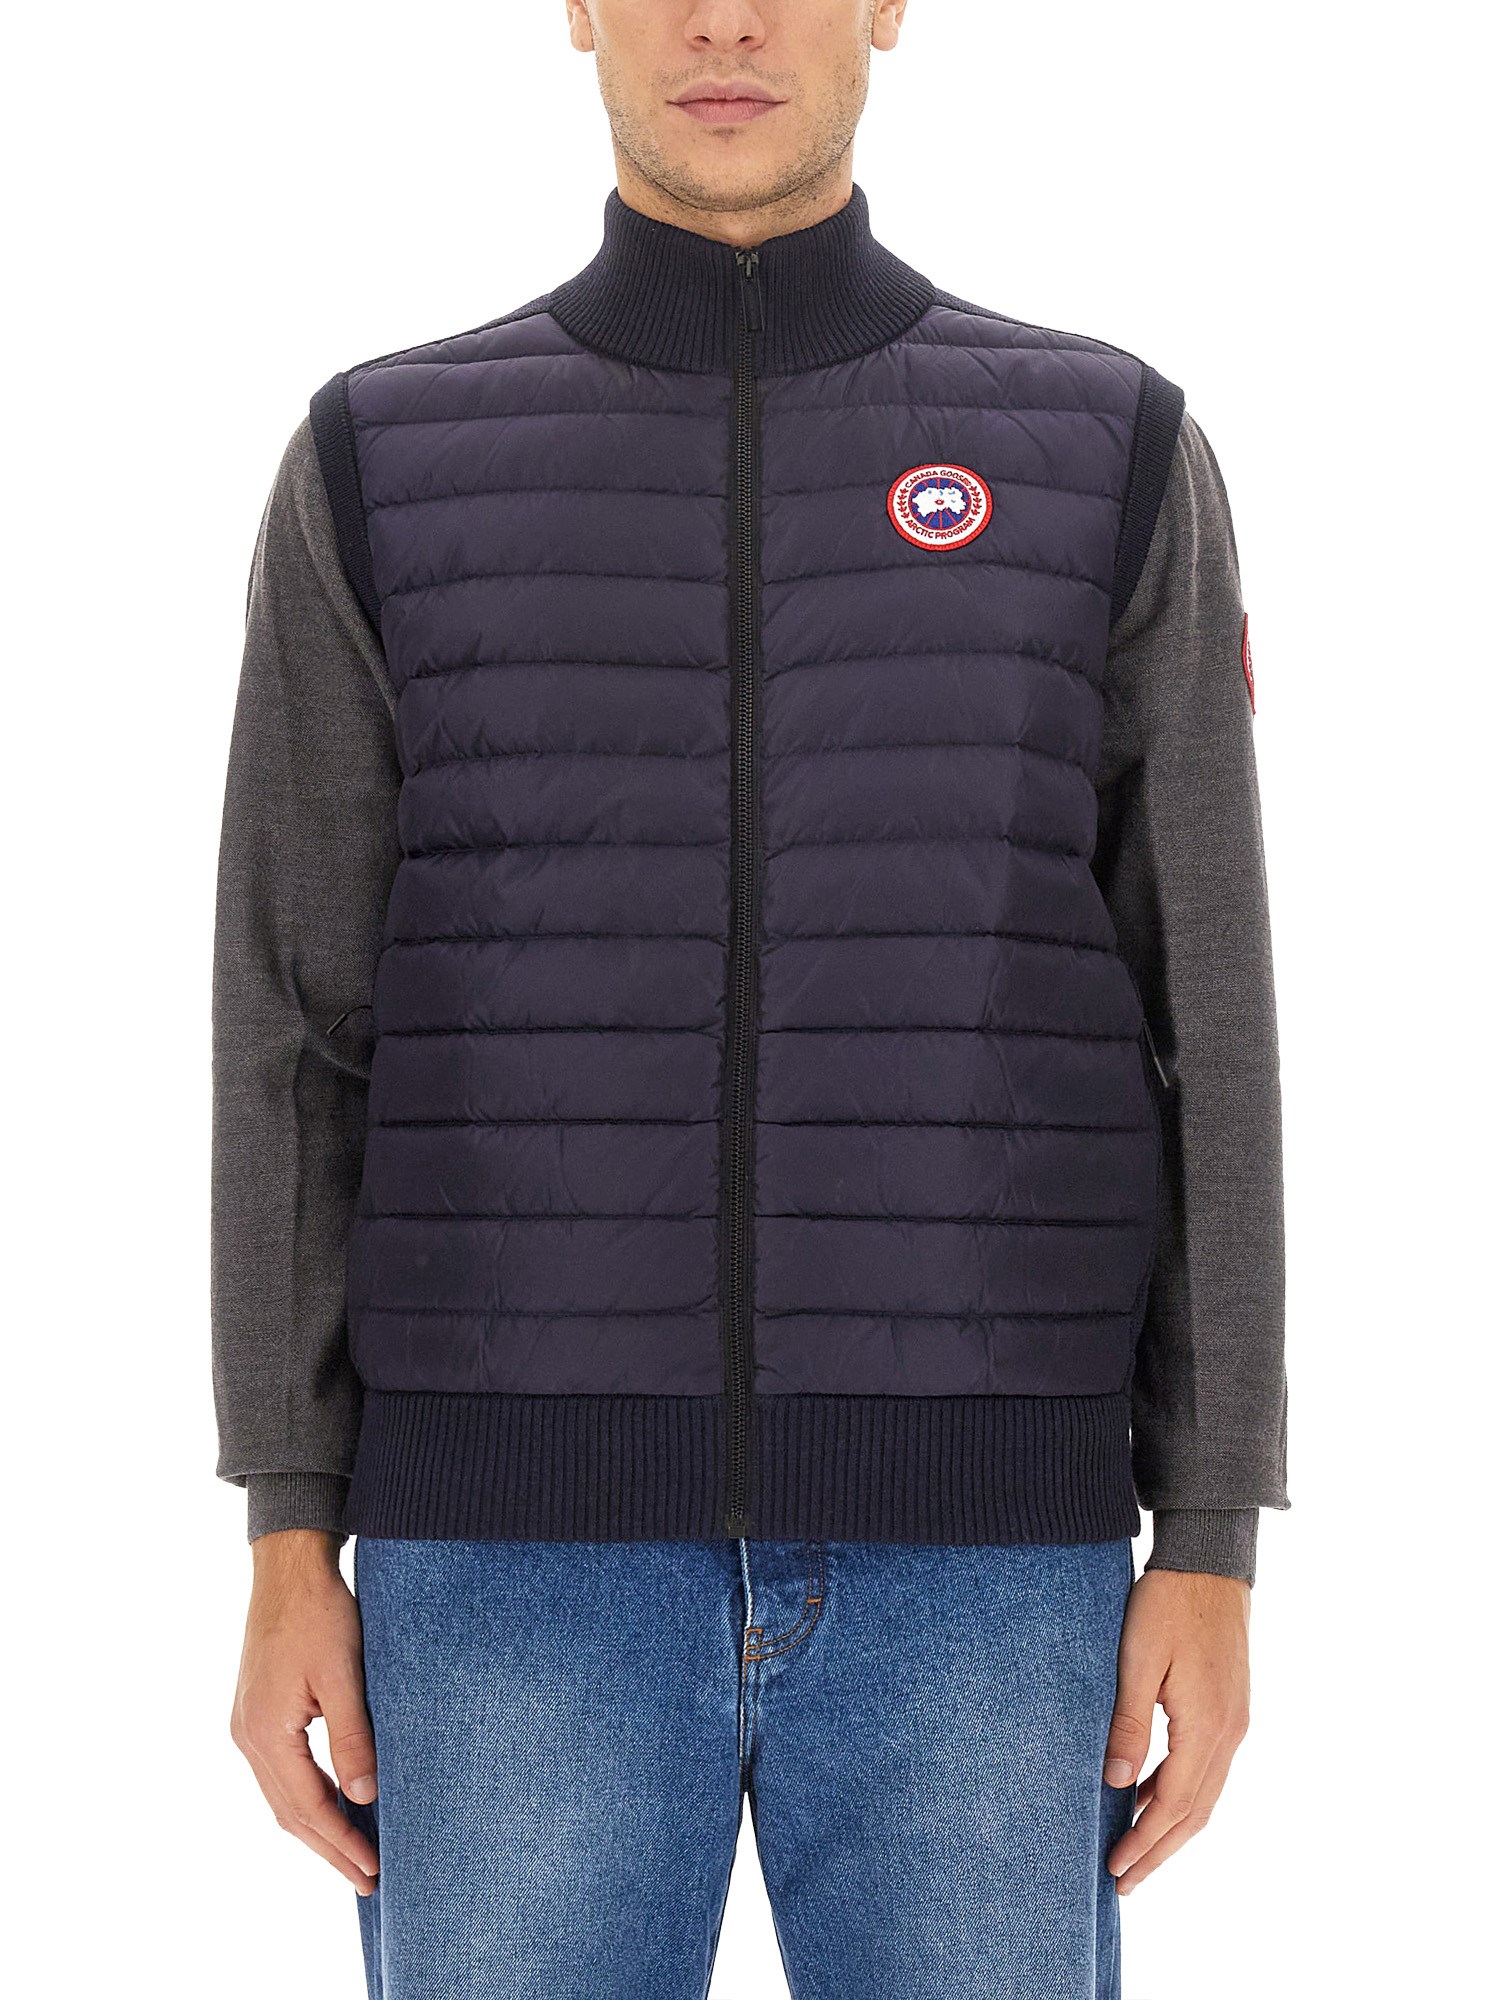 canada goose vests with logo